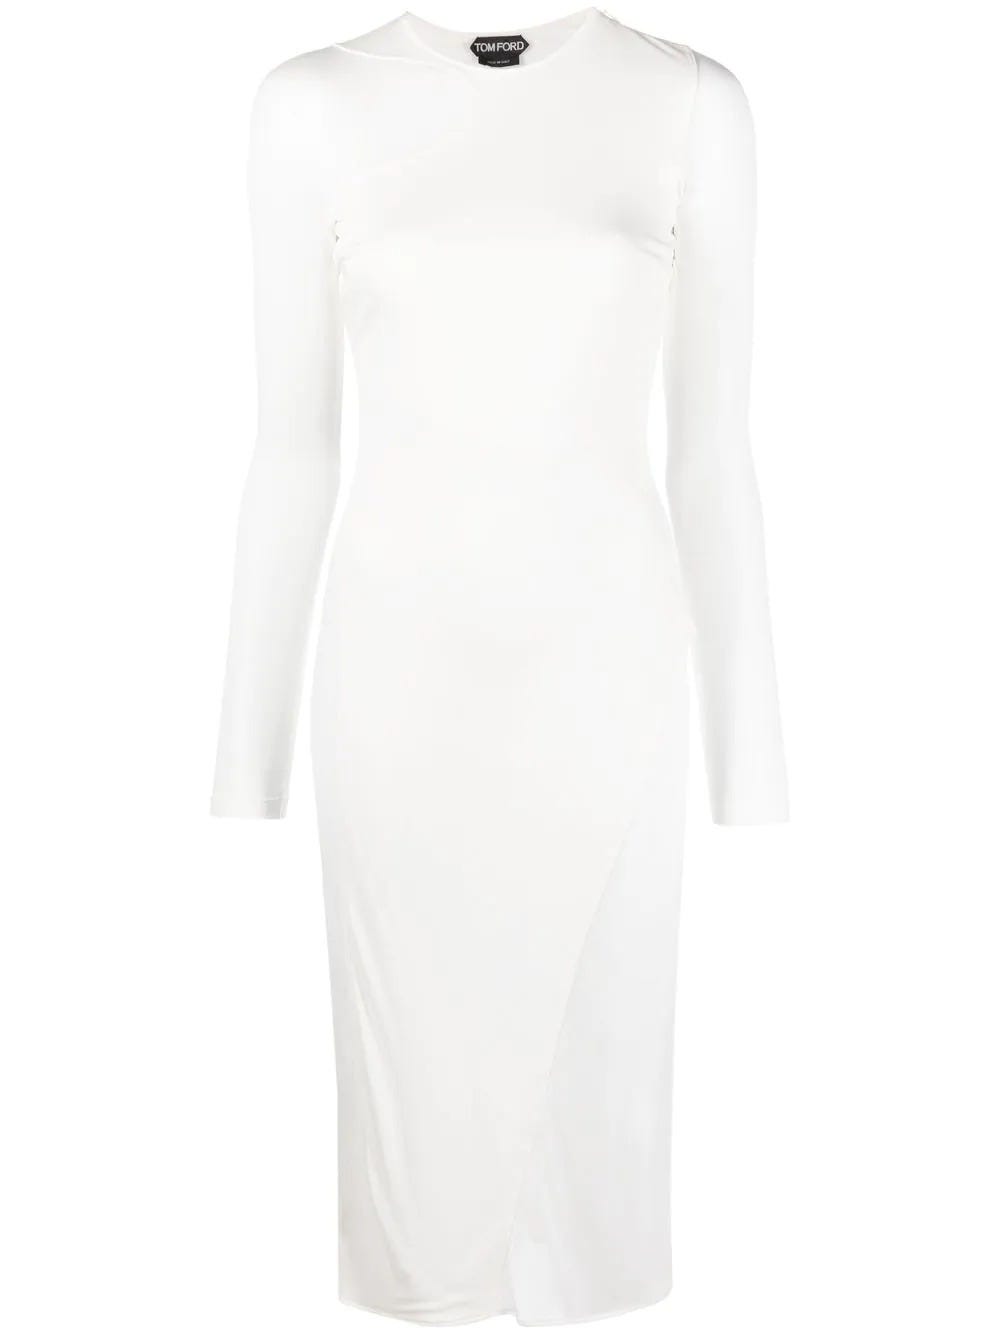 TOM FORD WHITE MIDI DRESS WITH TRANSPARENT INSERTS